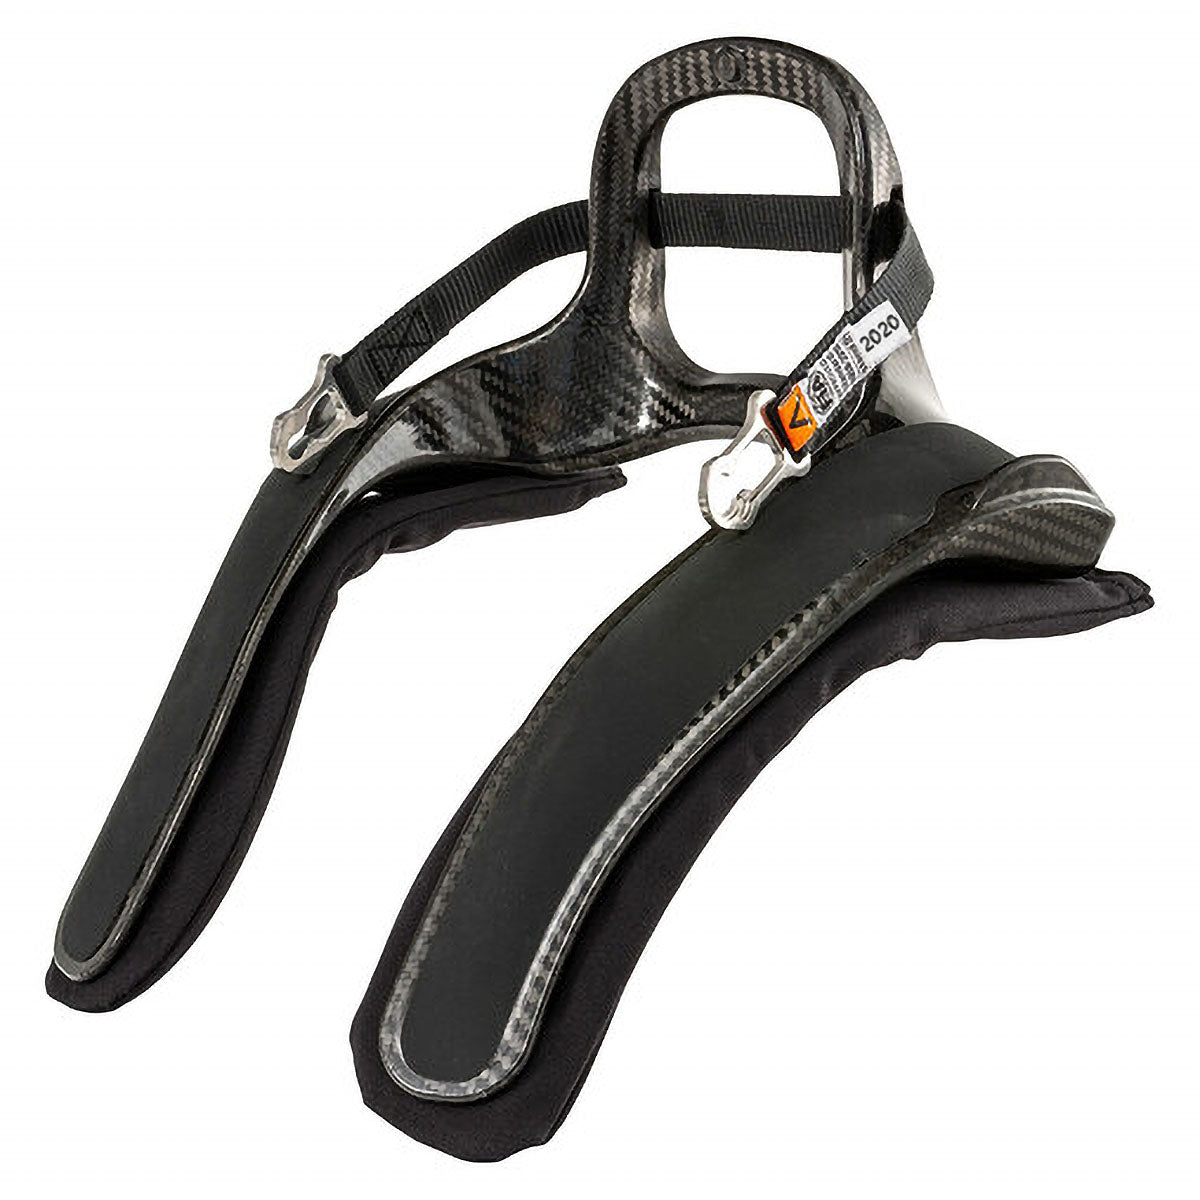 Stand21 Featherlite Head And Neck Restraint